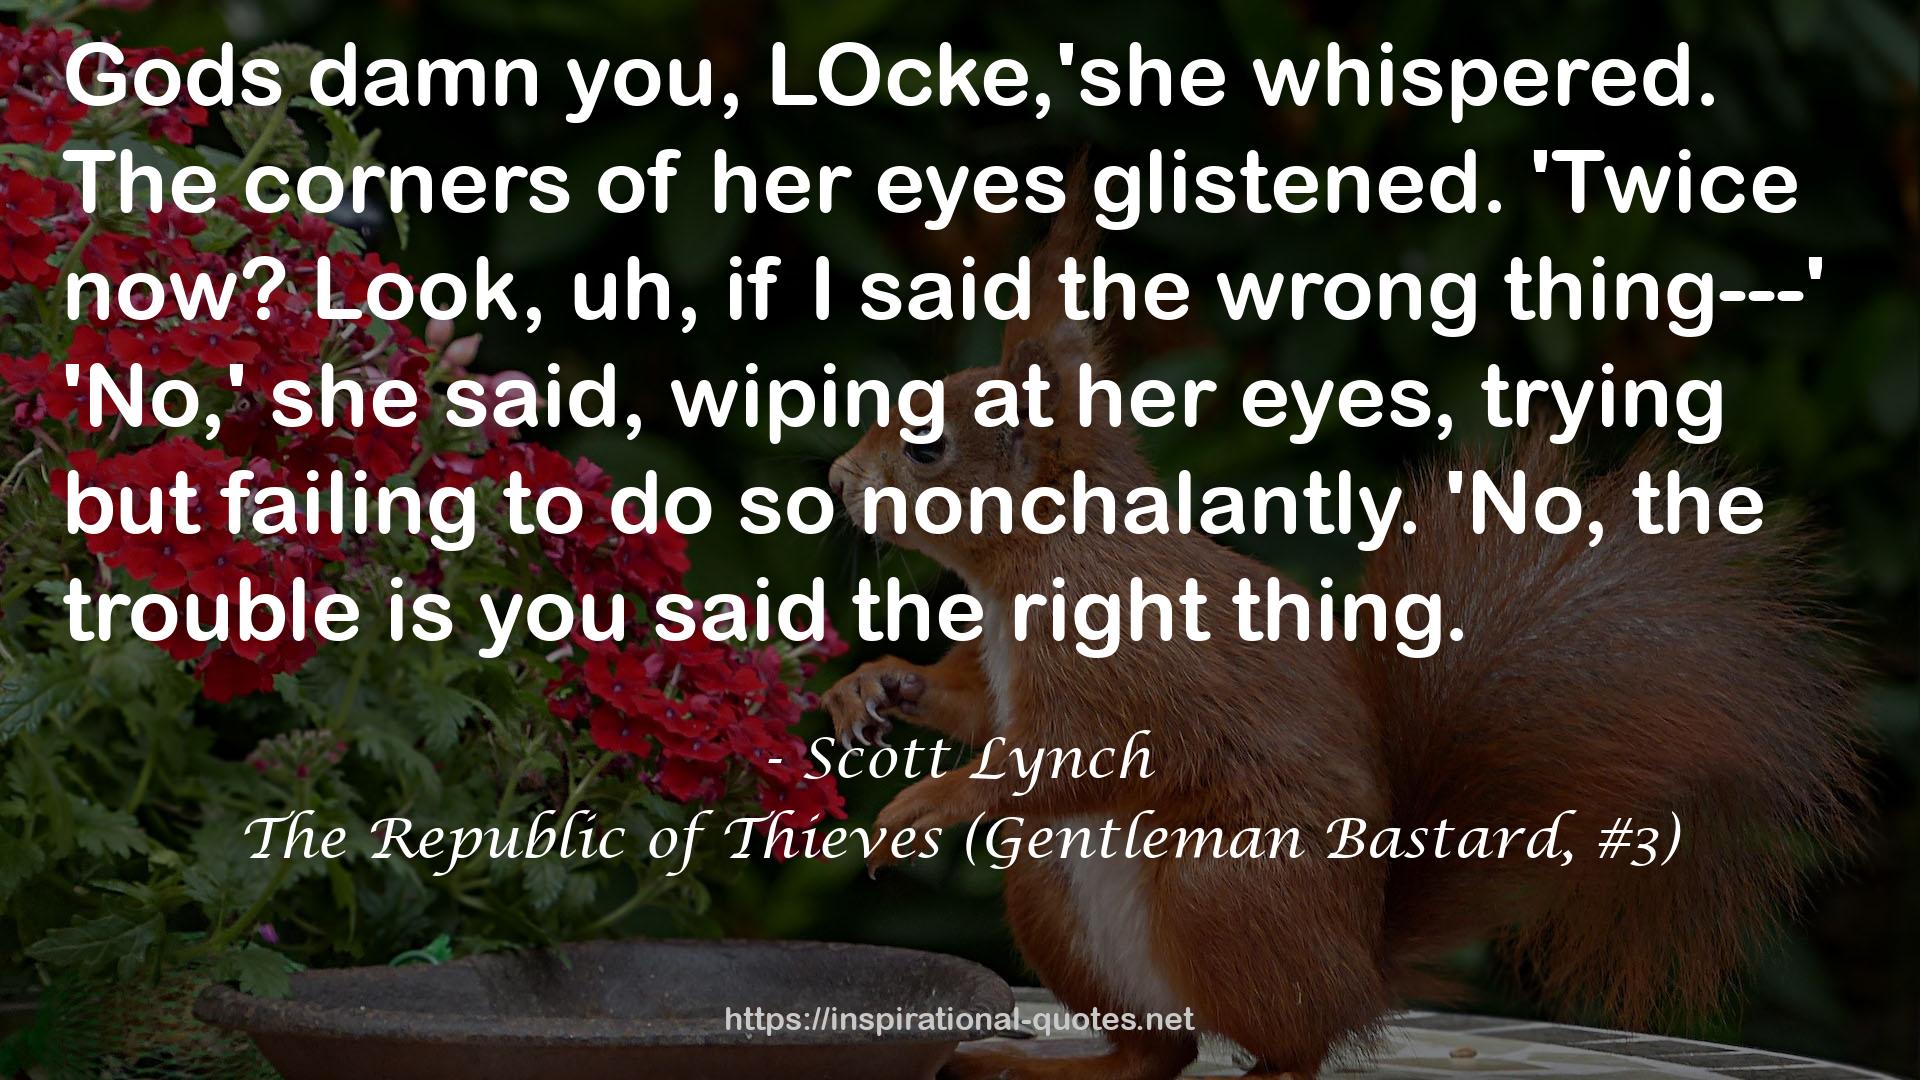 The Republic of Thieves (Gentleman Bastard, #3) QUOTES